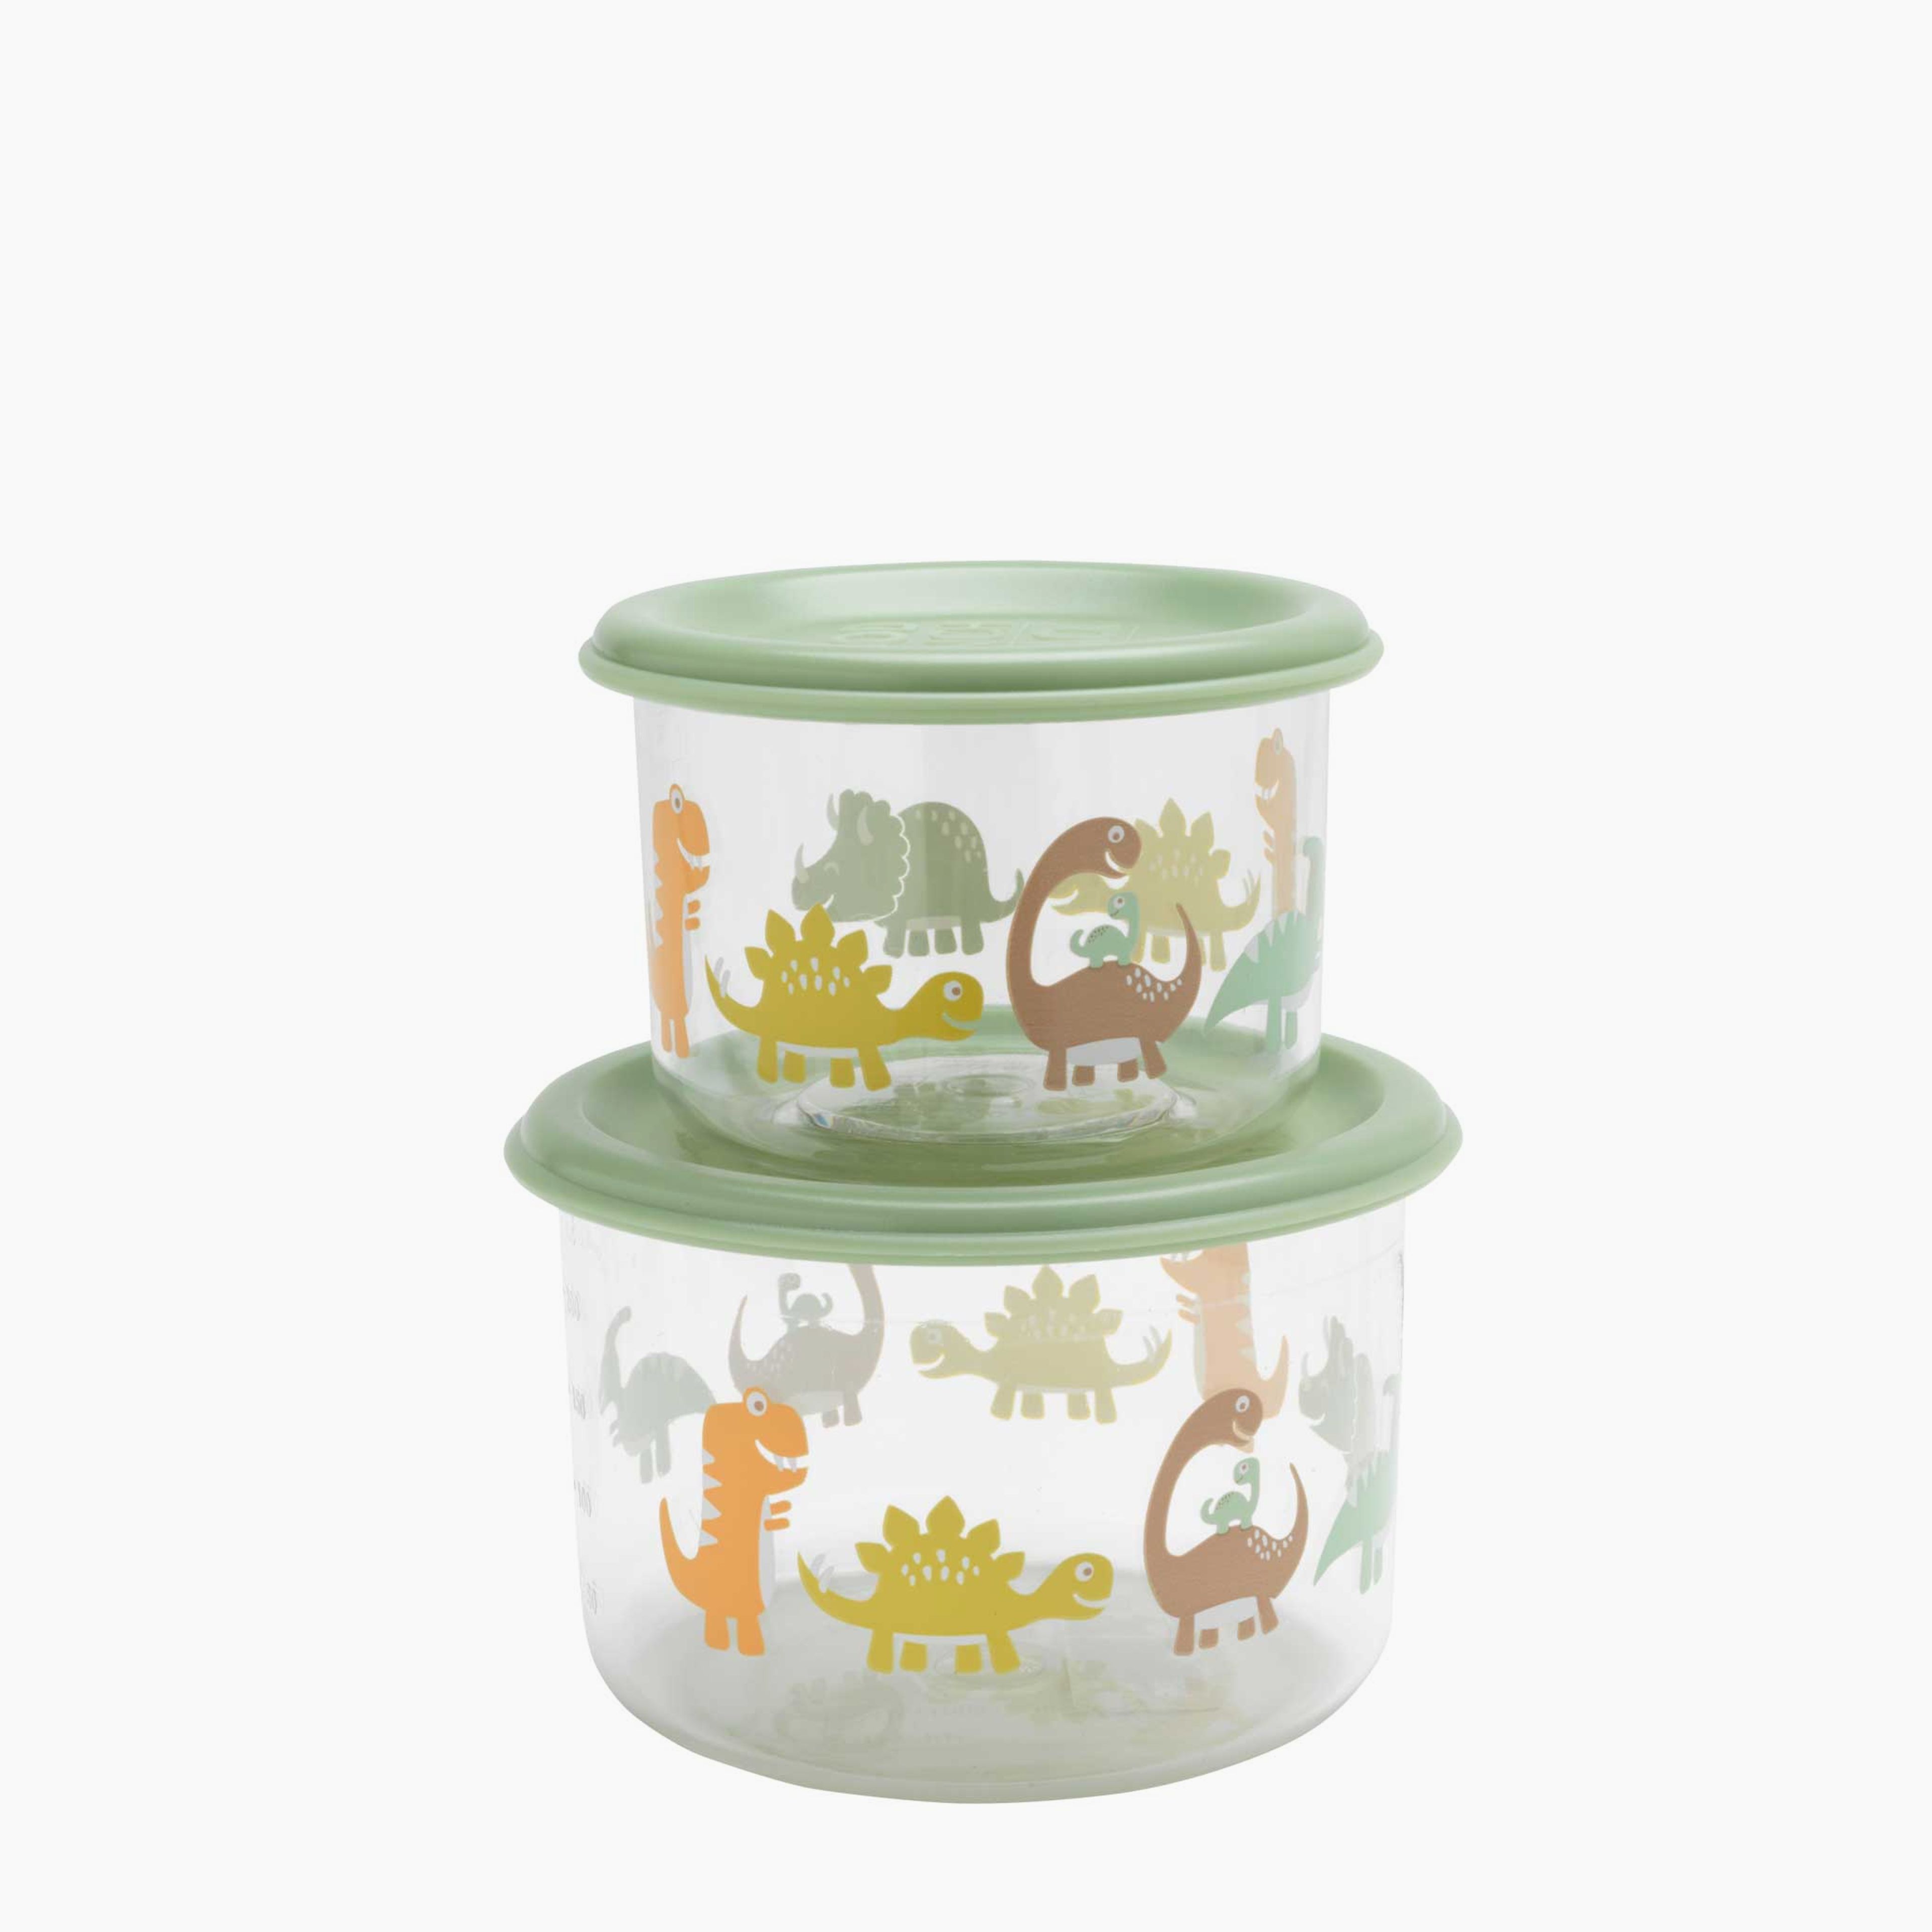 Good Lunch Snack Containers | Baby Dinosaur | Small